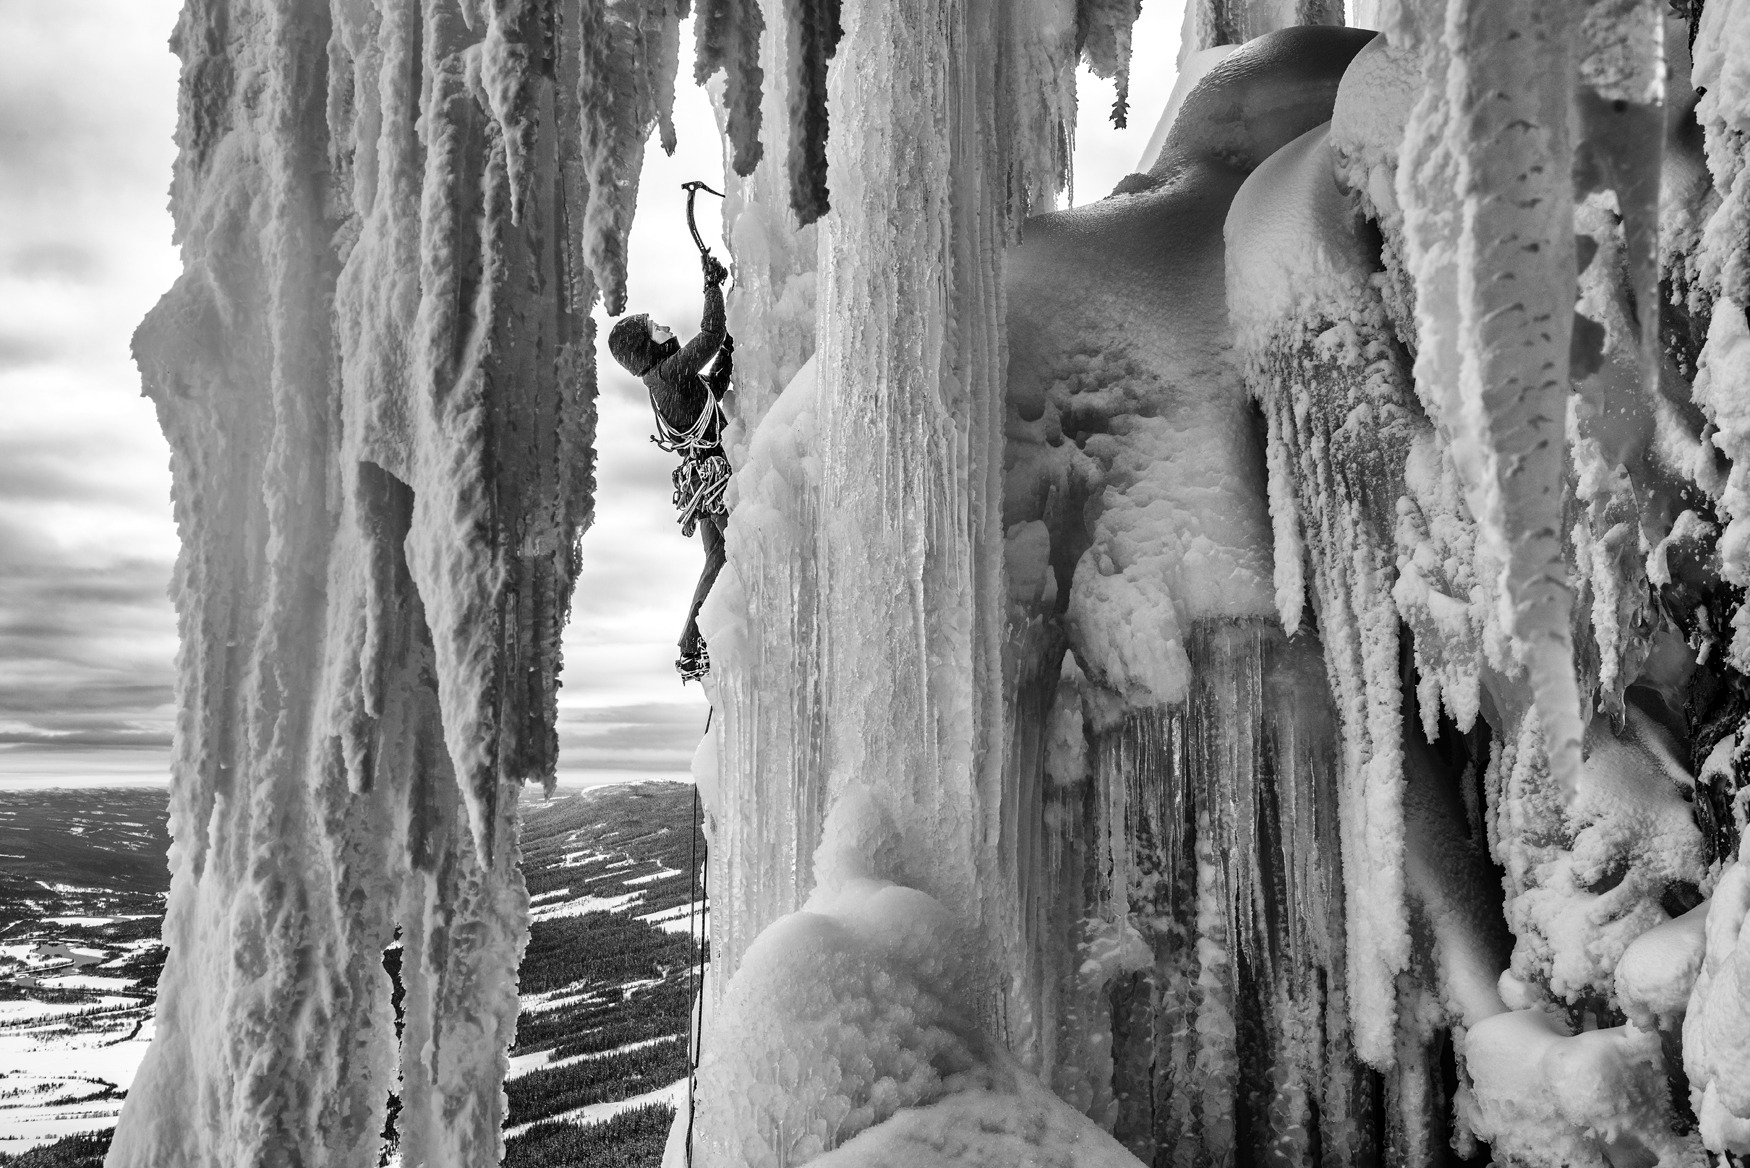 Ines Papert and Heike Schmitt ice climbing the central line WI6